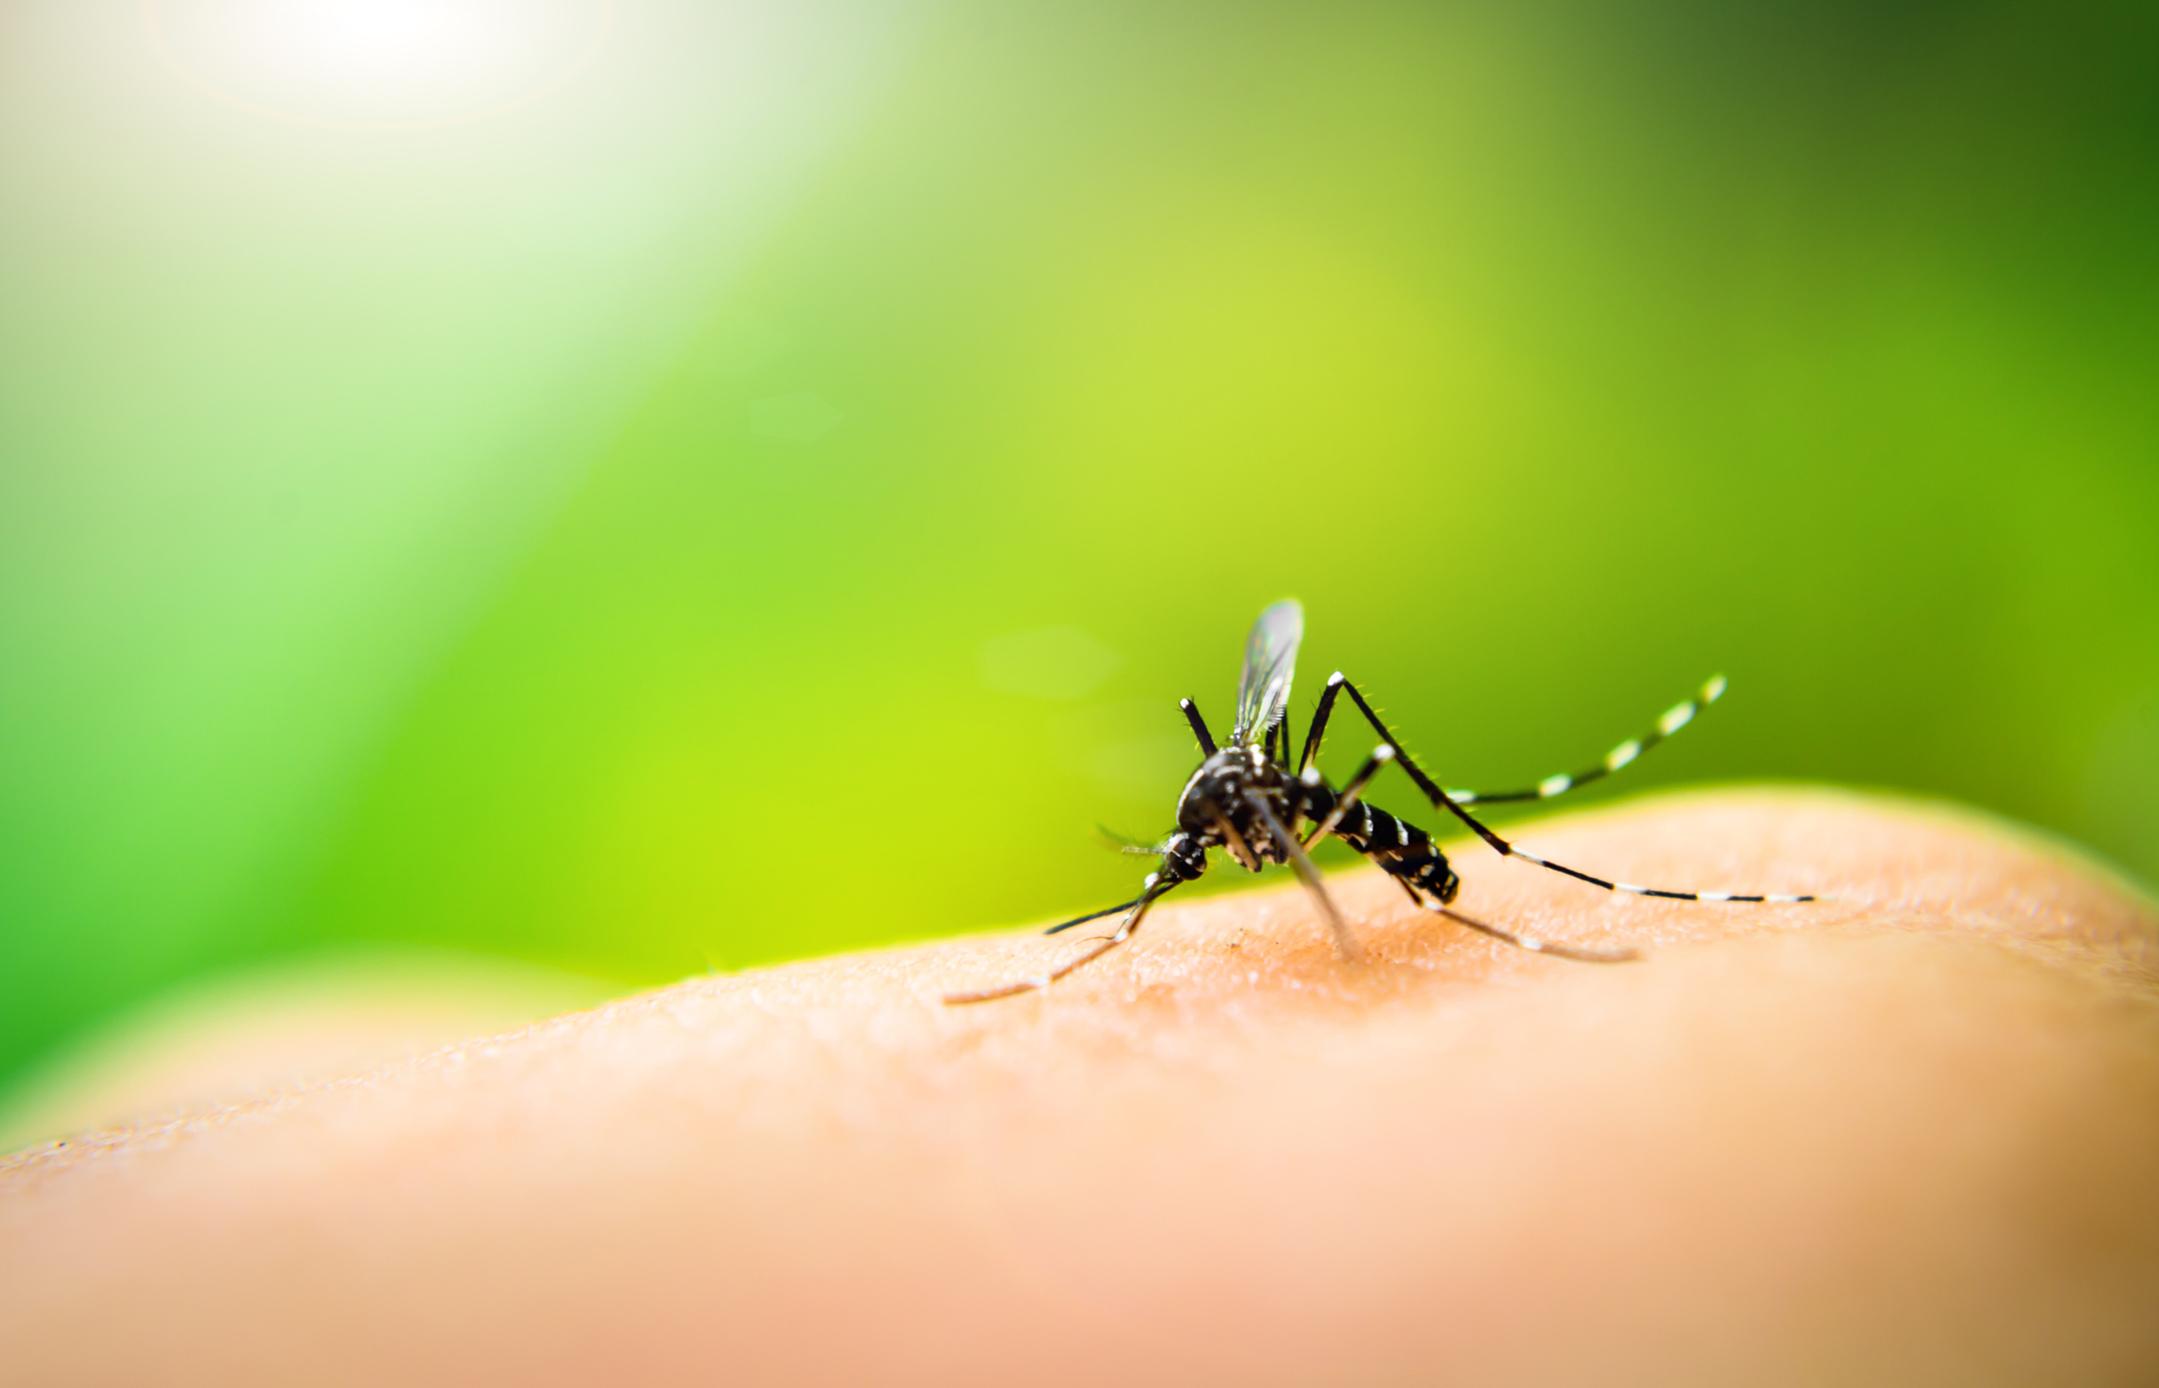 Scientists from the University of Adelaide’s Research Centre for Infectious Diseases have identified a key protein that controls malaria parasite entry into host red blood cells. 